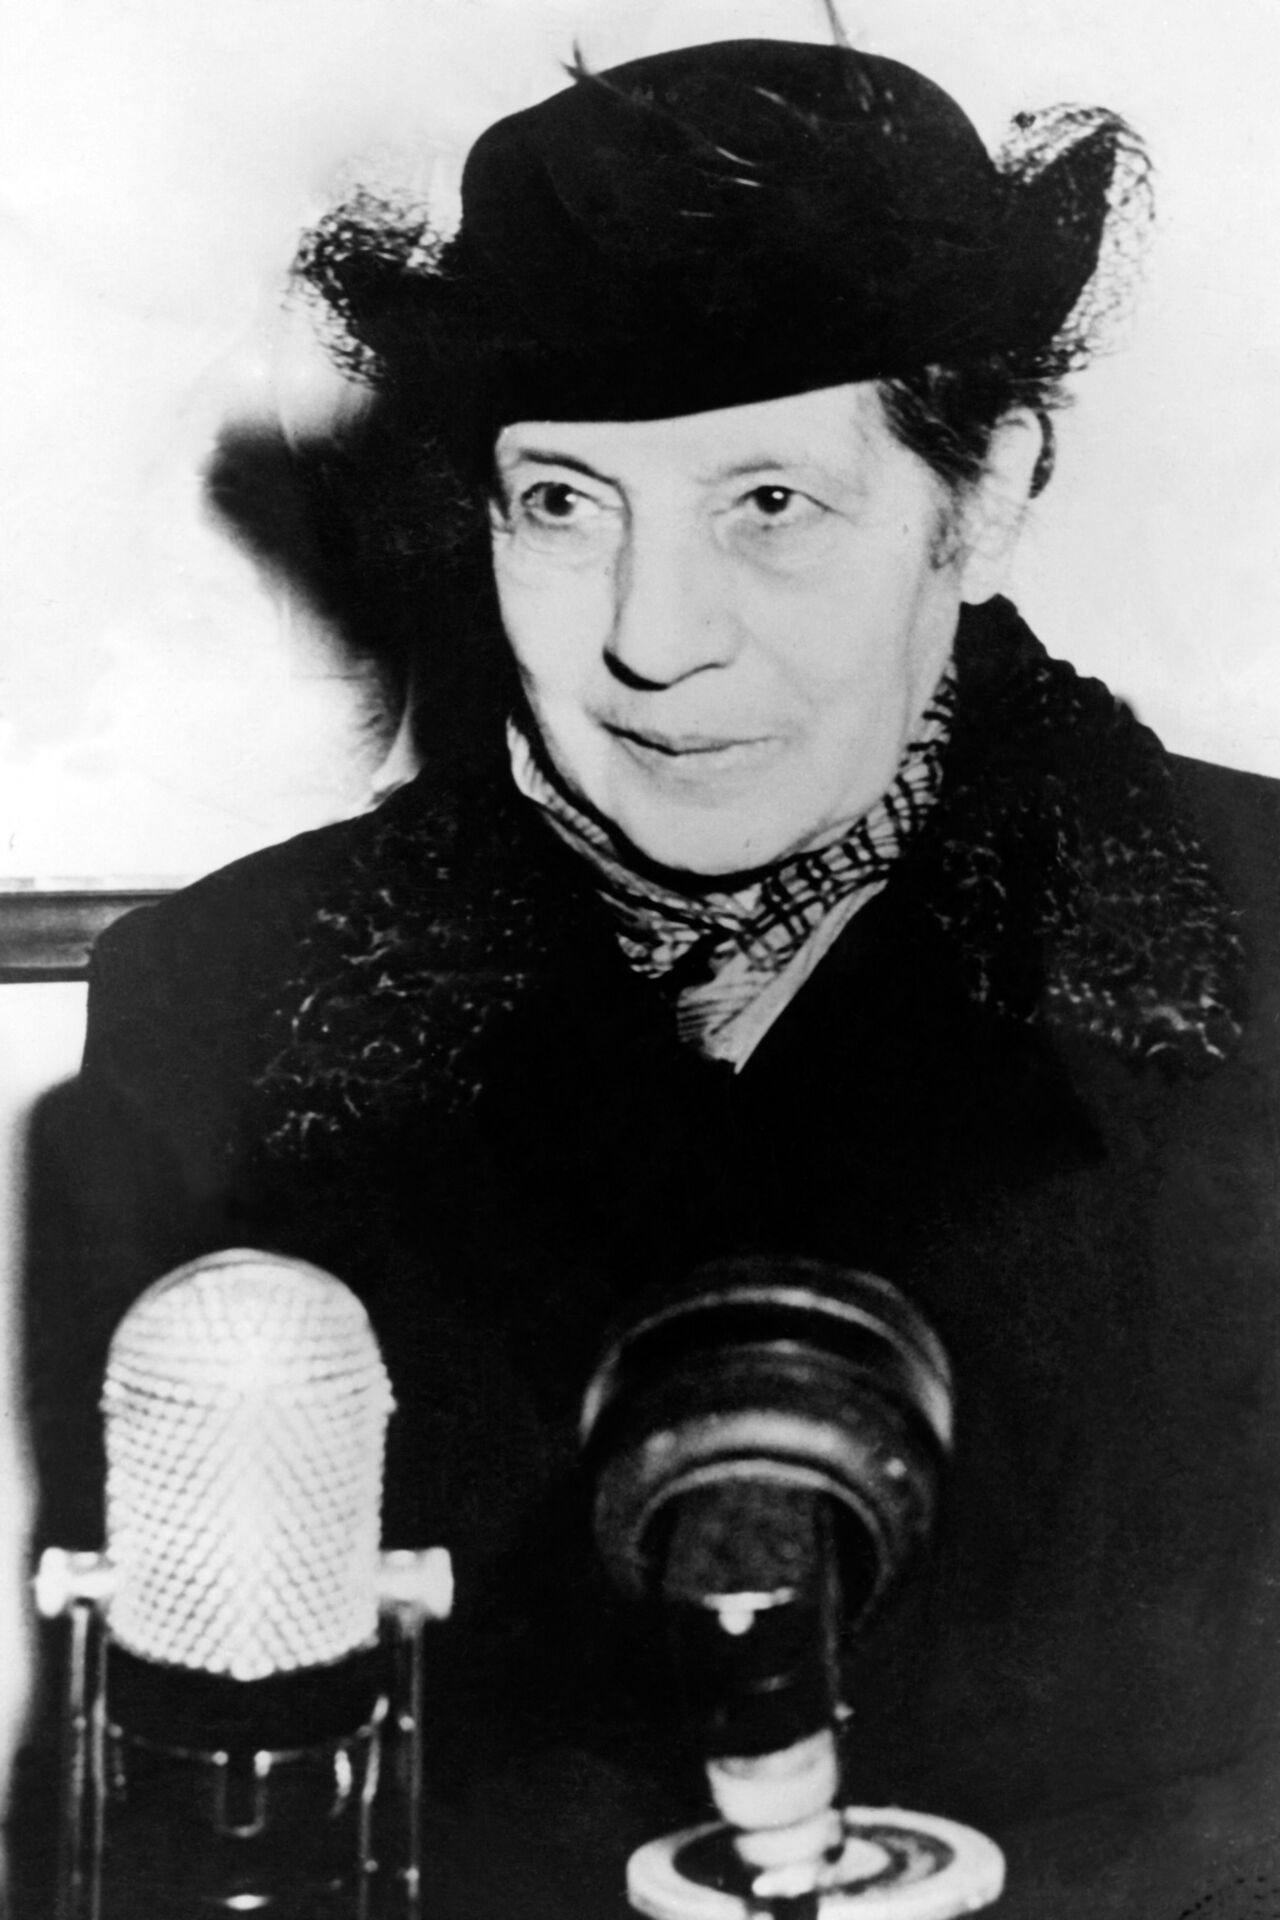 Undated portrait of Austrian born, later Swedish physicist Lise Meitner (1878-1968) who studied radioactivity and nuclear physics, and was part of the team that discovered nuclear fission, for which her colleague Otto Hahn was awarded the 1944 Nobel Prize in Chemistry. AFP